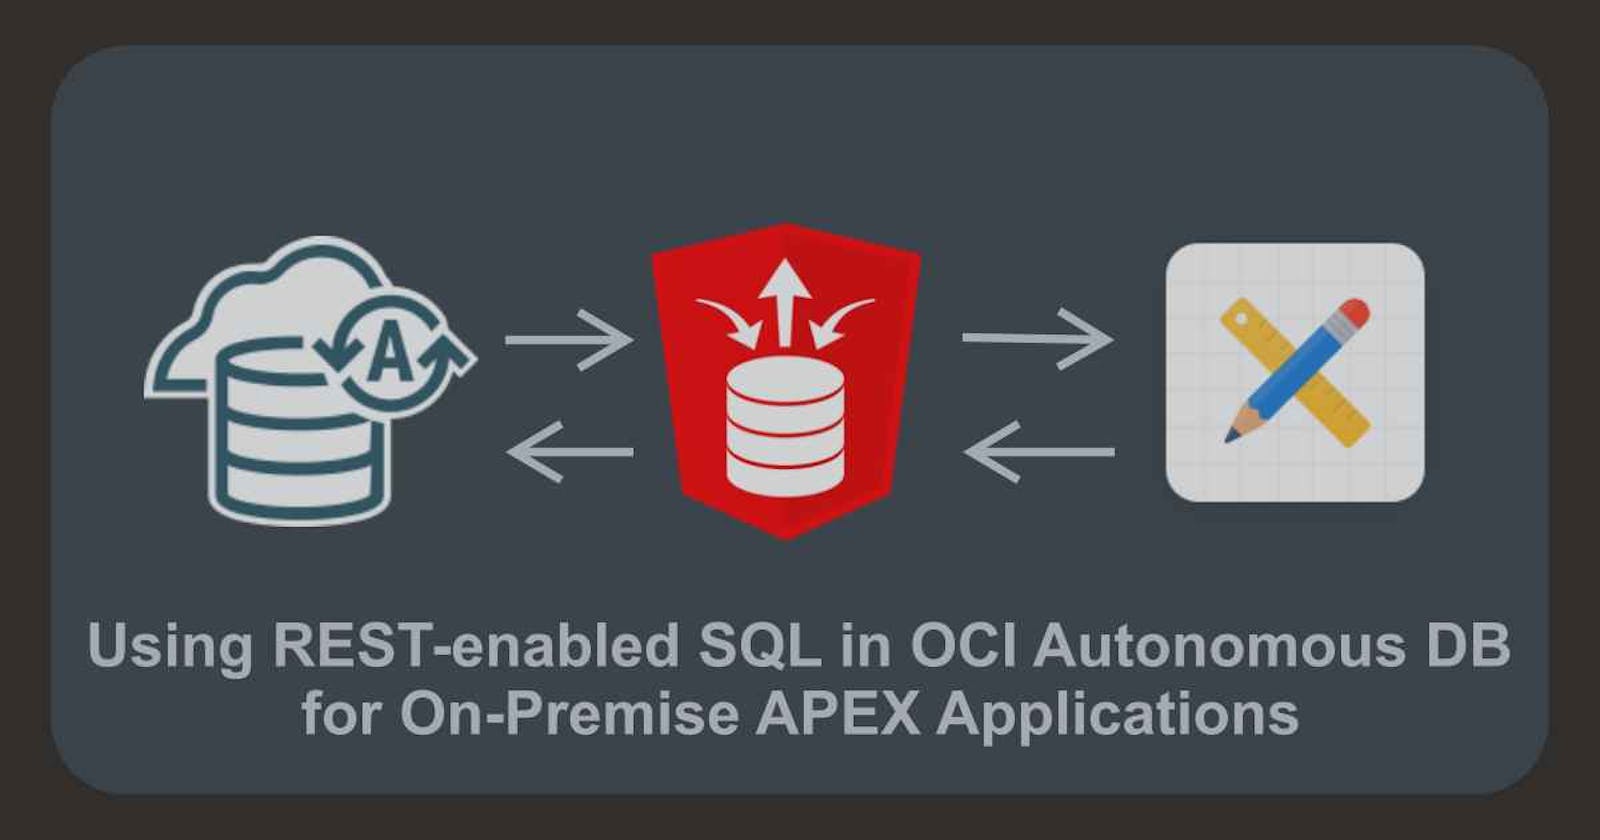 Using REST-enabled SQL in OCI Autonomous DB for On-Premise APEX Applications